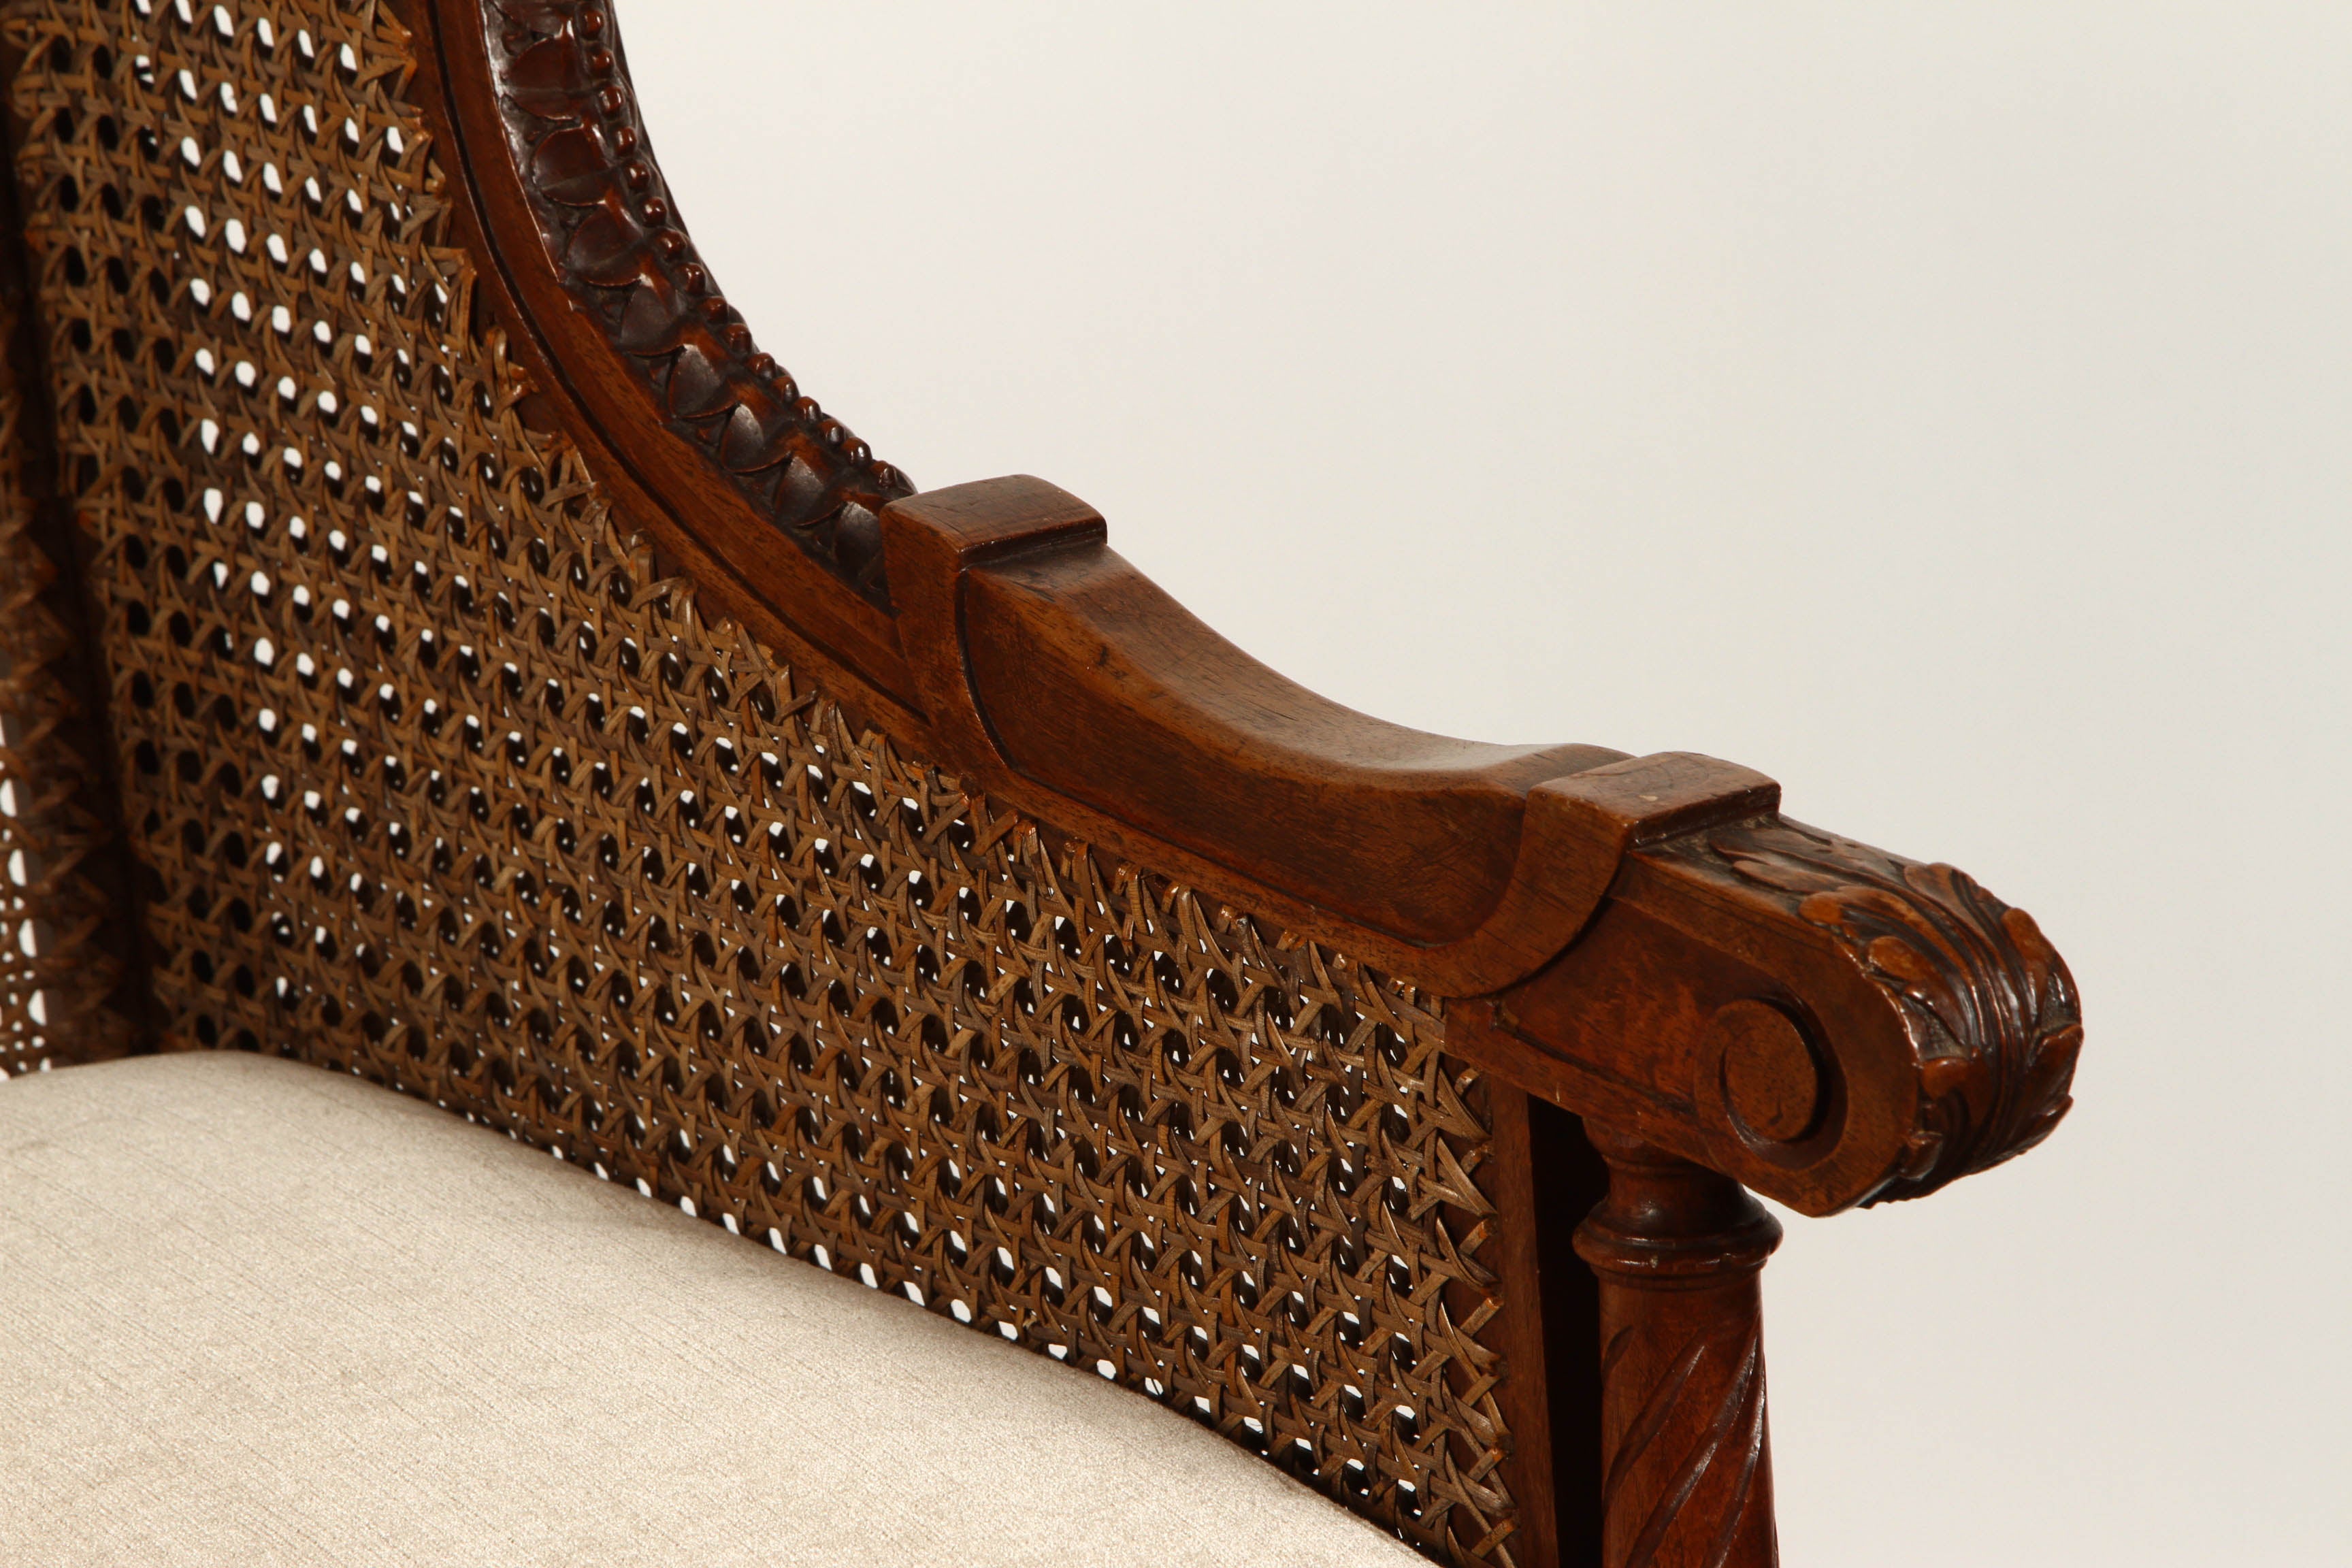 A French cushioned cane chair, circa 1890. The Cushion is new and the cane is very good condition.